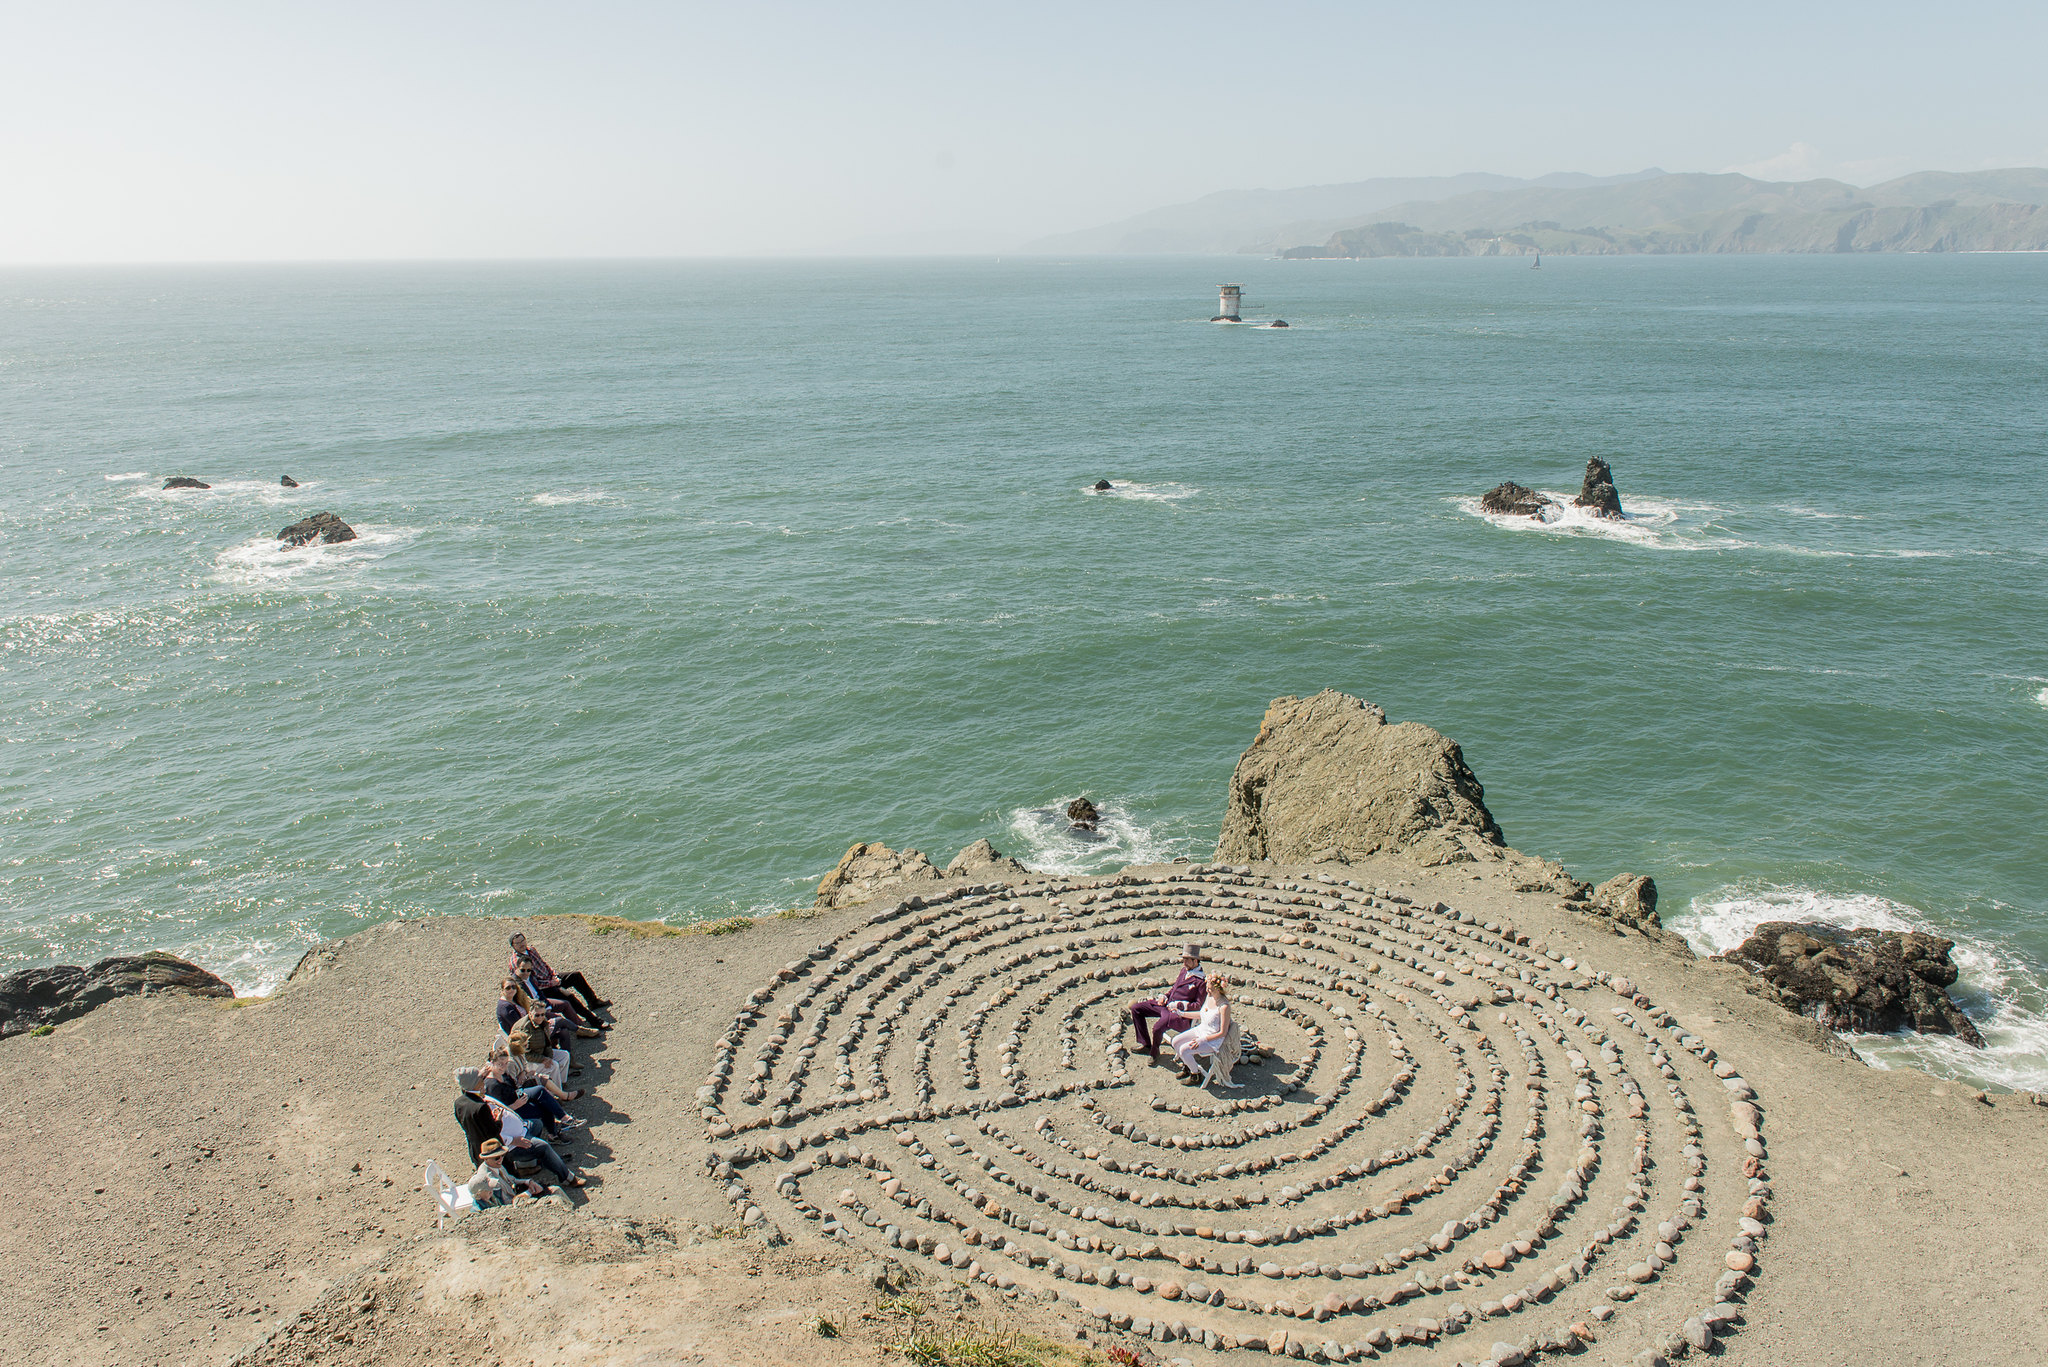 micro wedding ceremony happening in front of the ocean in a rock labrynth